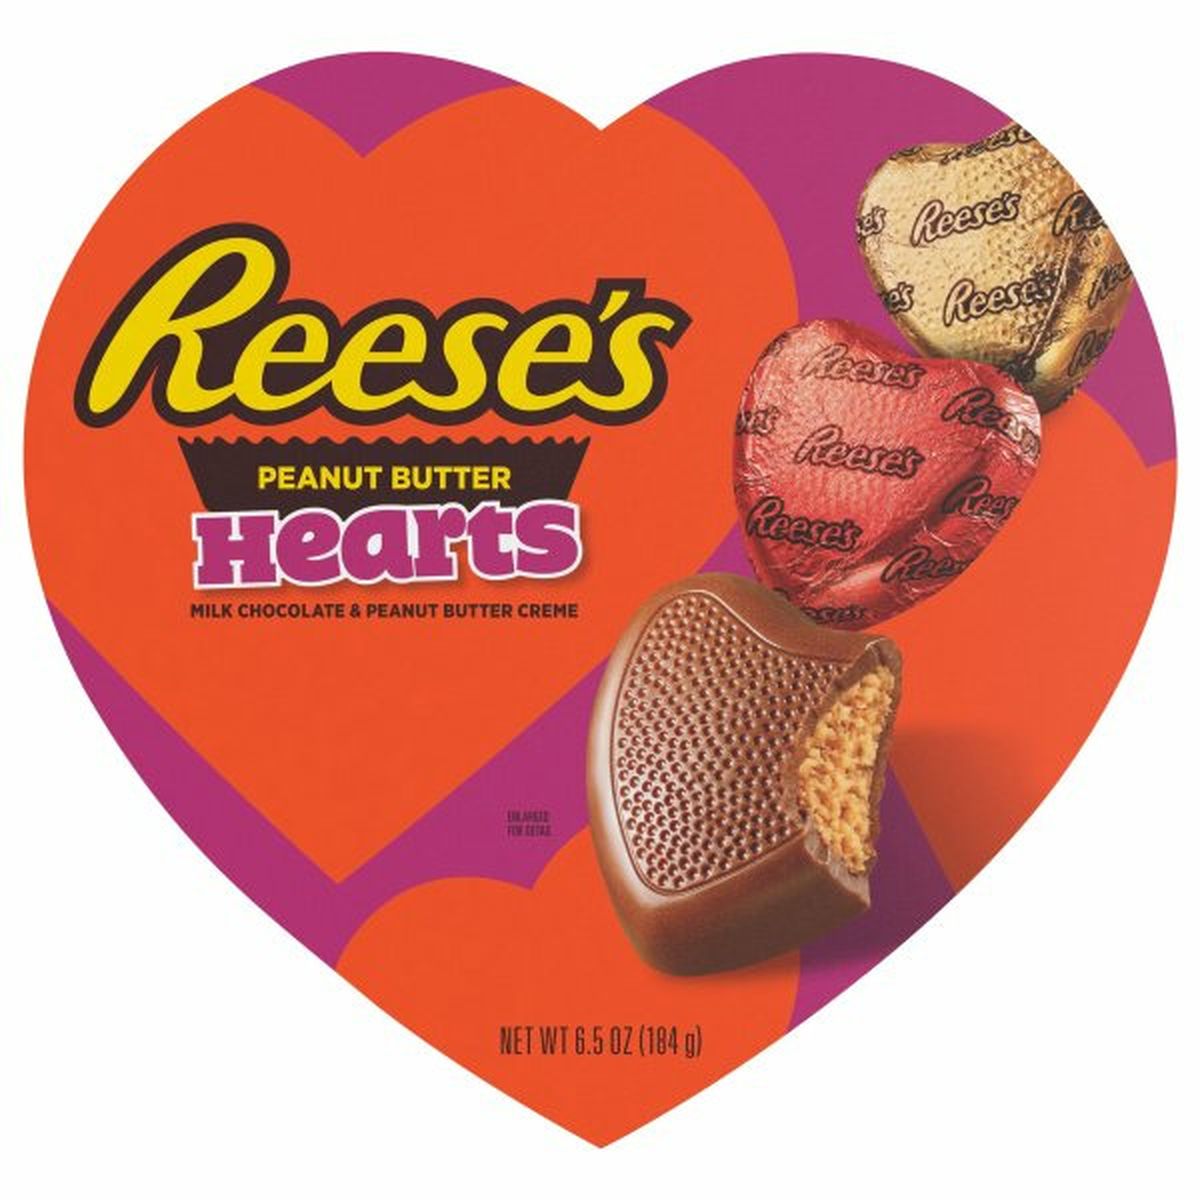 Calories in Reese's Milk Chocolate, Peanut Butter Creme, Hearts